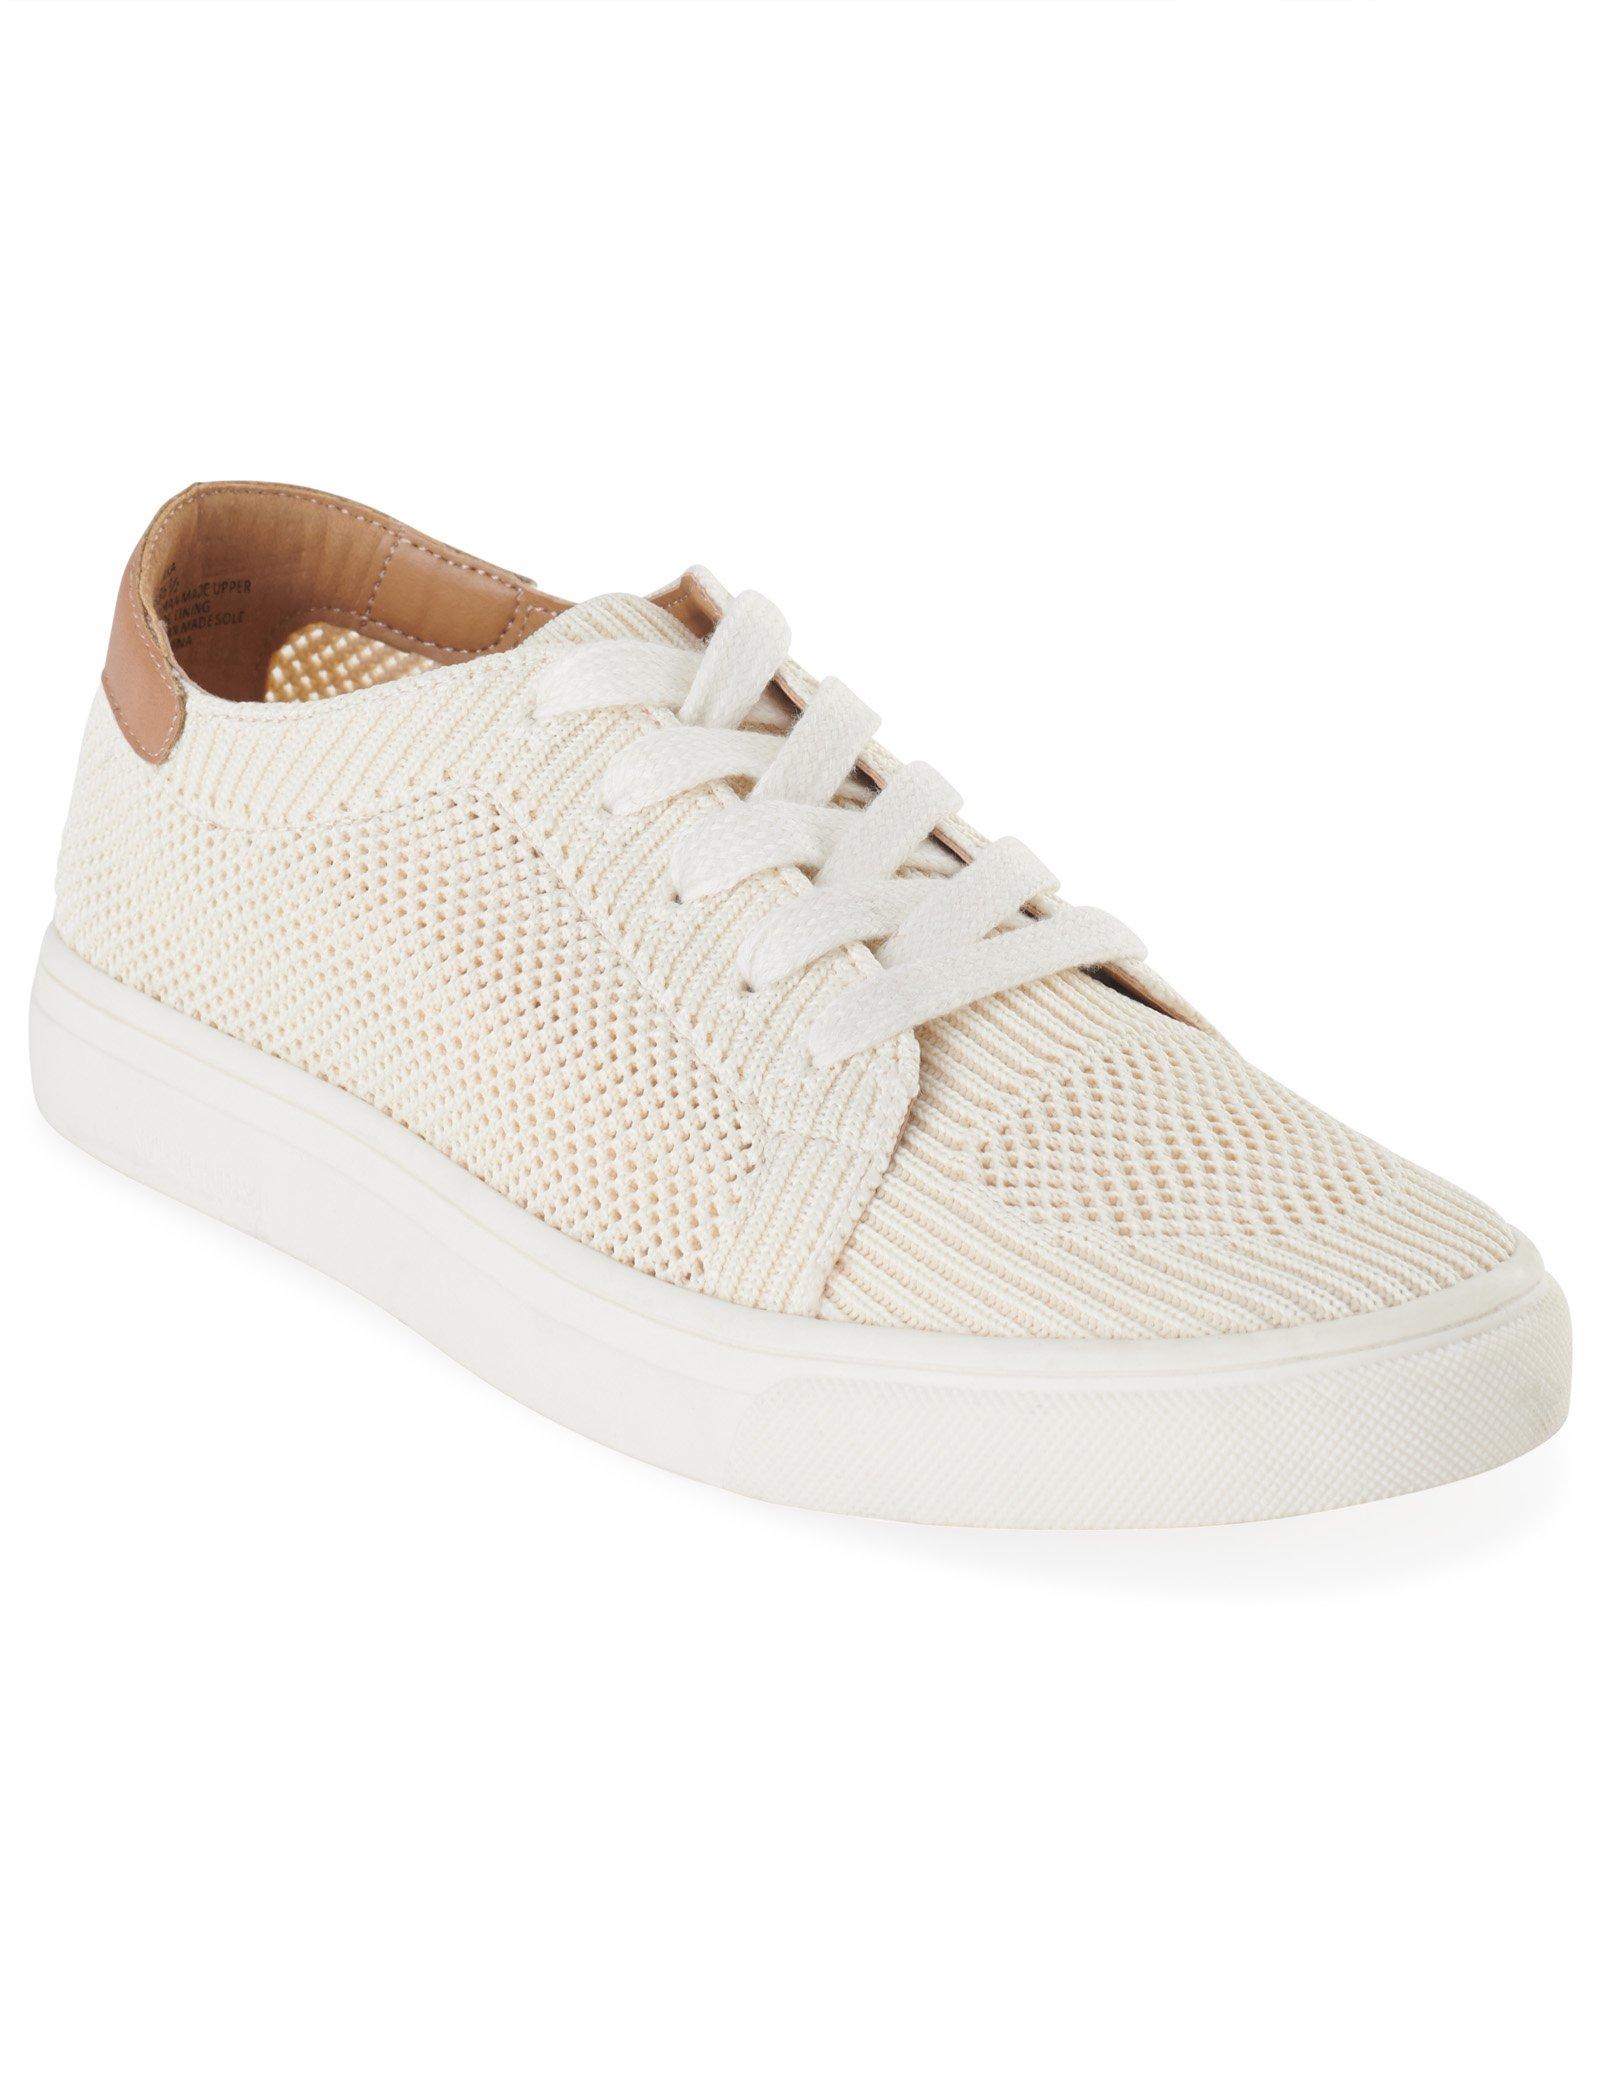 lucky brand tennis shoes